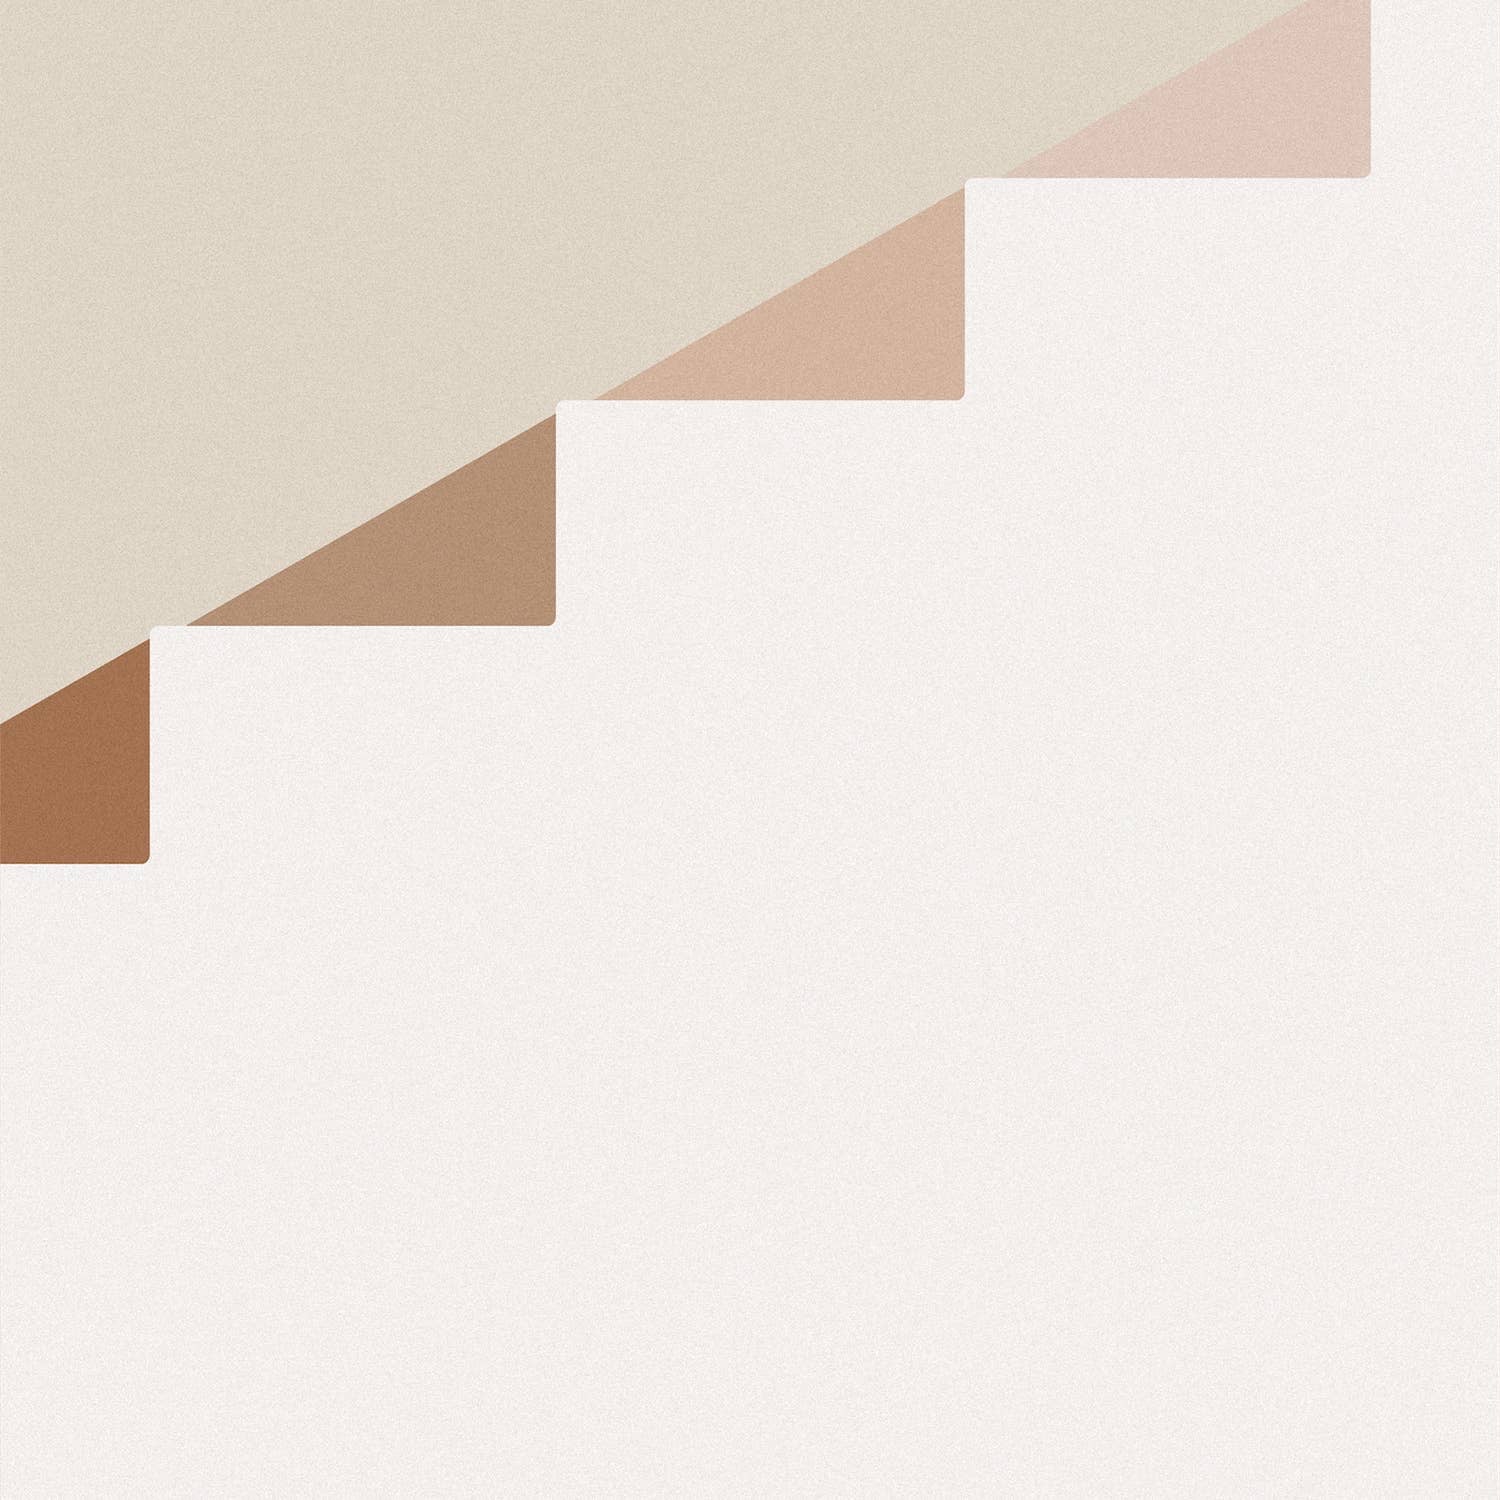 Buhlaixe Stairs print available at Rook & Rose